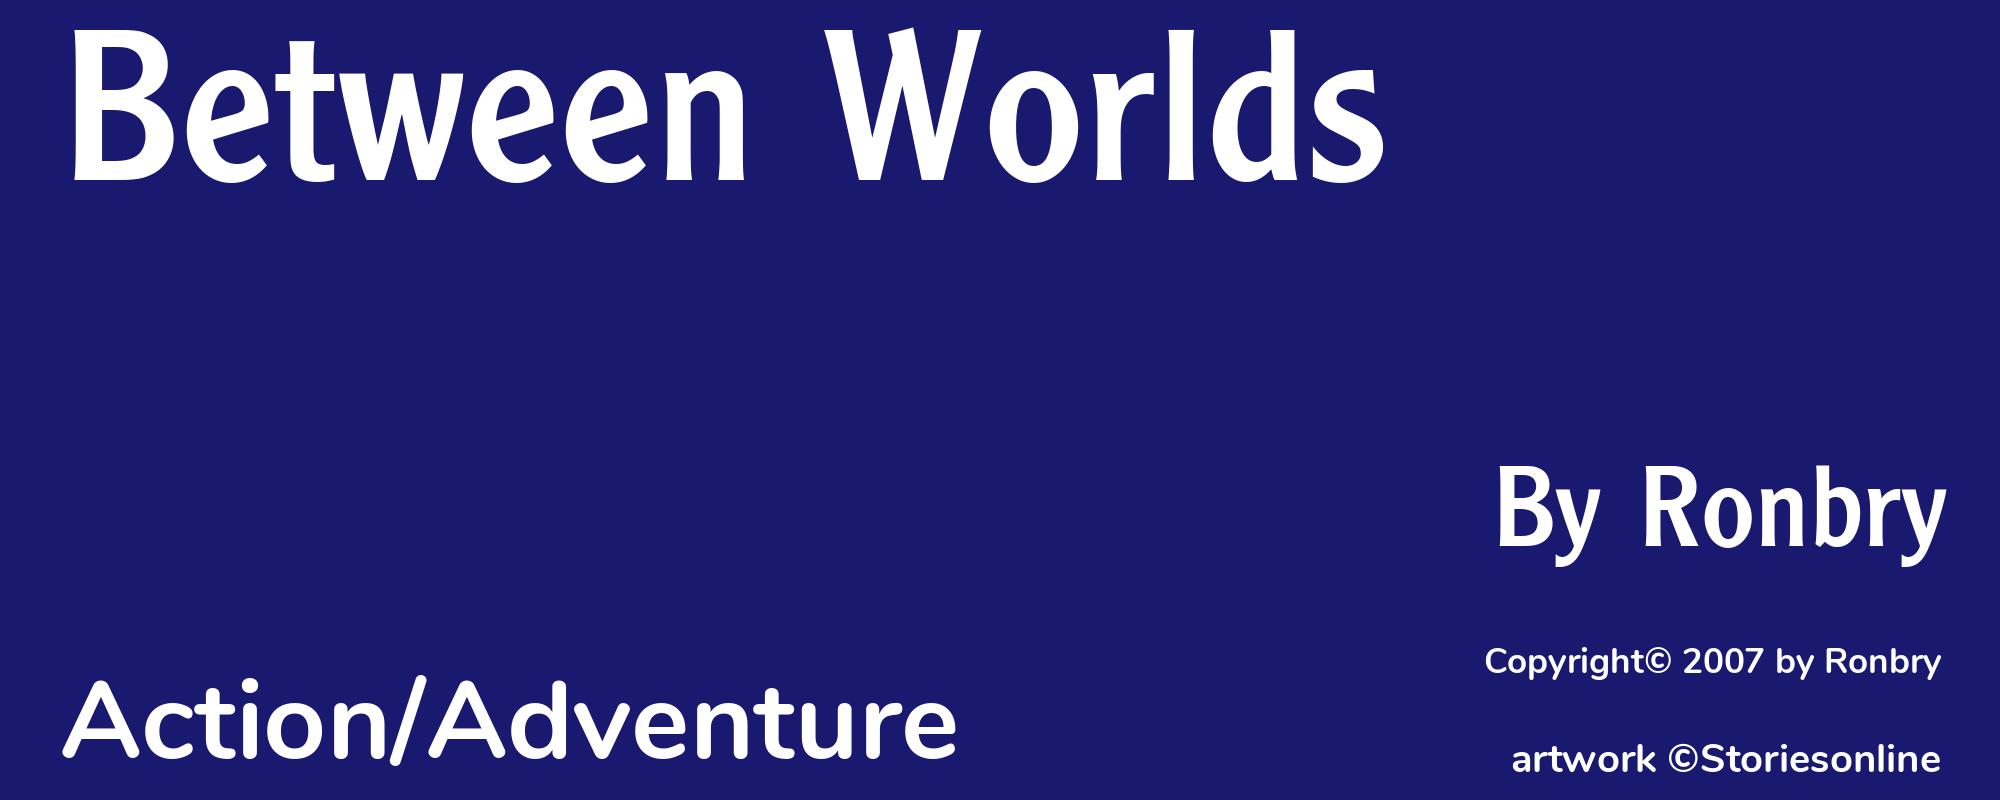 Between Worlds - Cover